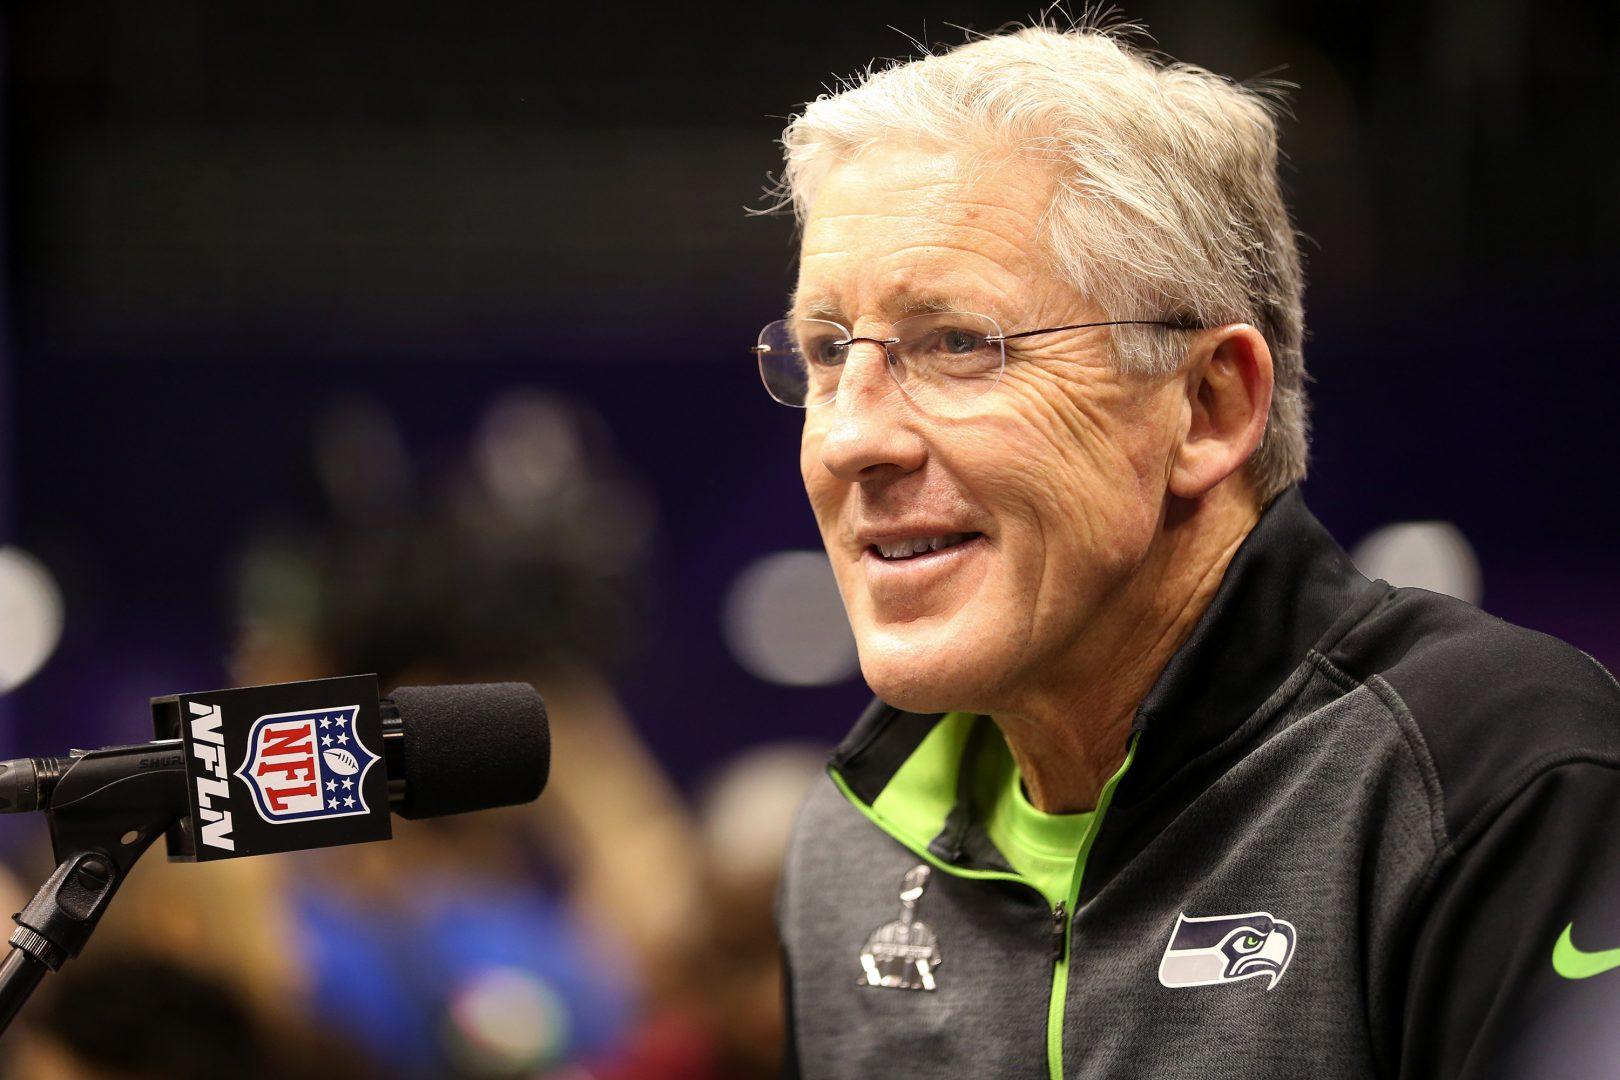 Seattle Seahawks head coach Pete Carroll speaks during Media Day on Tuesday, Jan. 27, 2015, at the US Airways Center in Phoenix. (Bettina Hansen/Seattle Times/TNS)